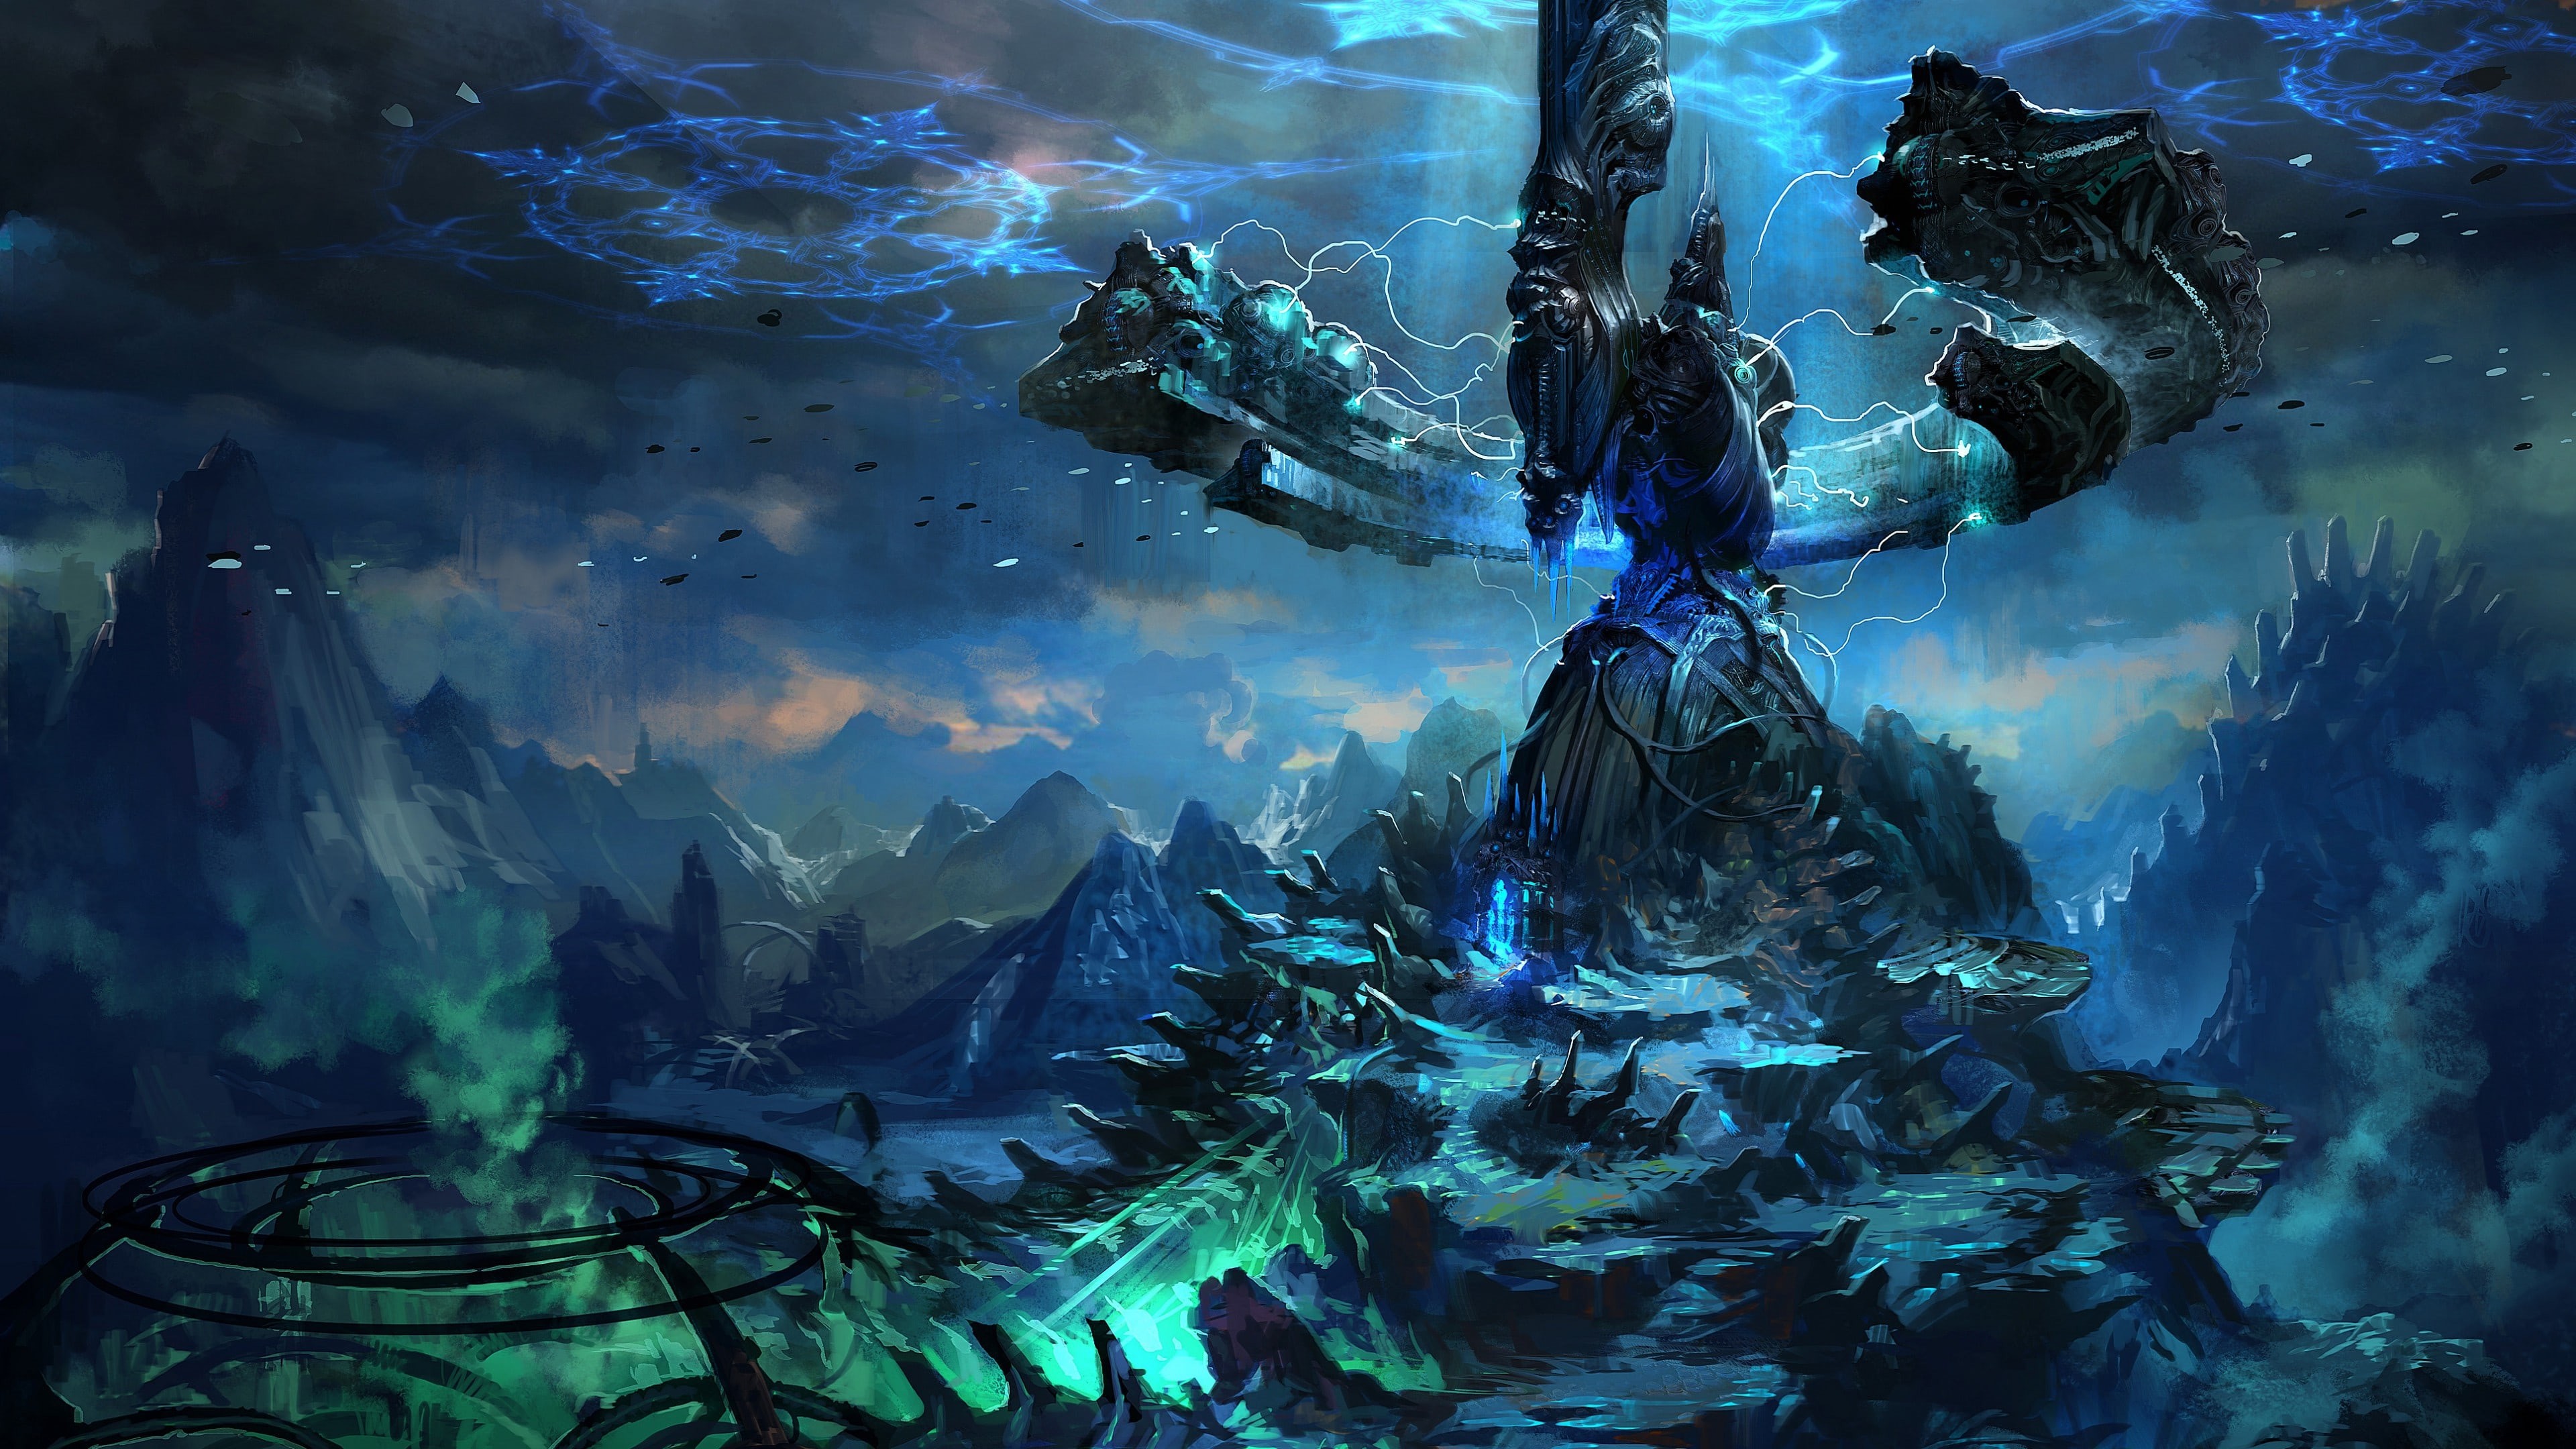 3840x2160 Wallpaper Tera online game mmorpg blue altar argonea mountain sky #911  CoolWallpapers.site